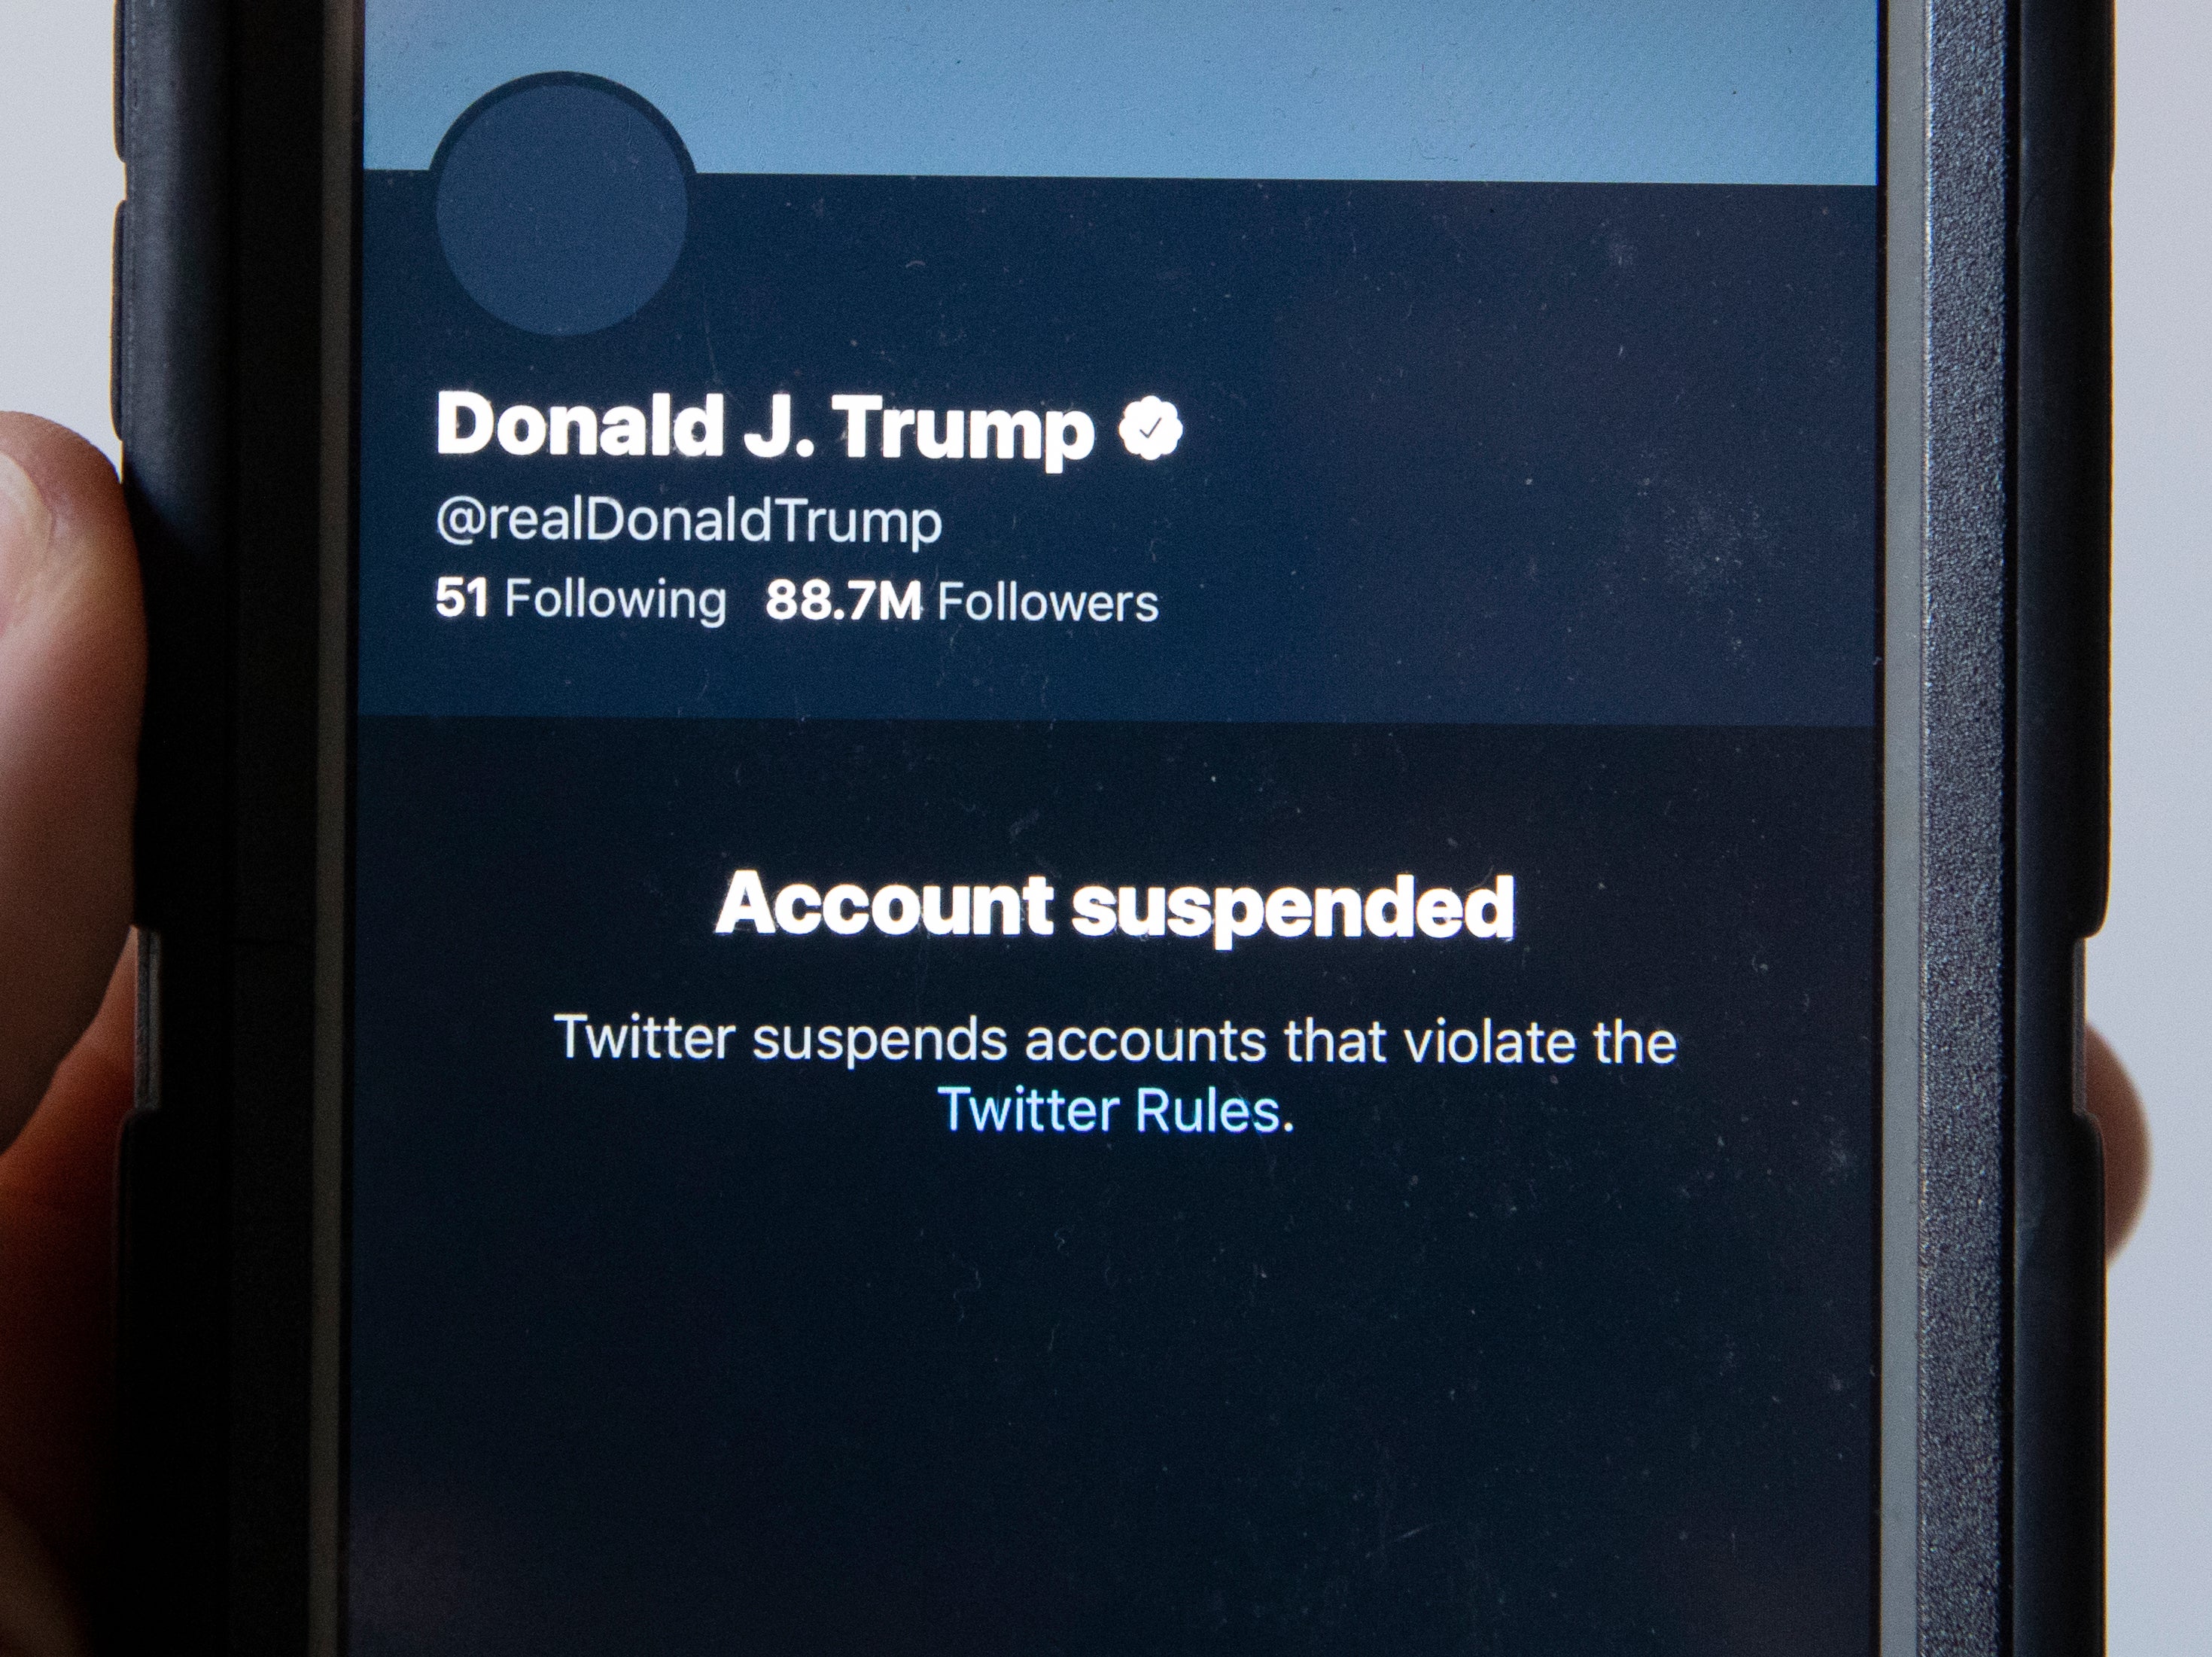 Donald Trump is banned from Twitter